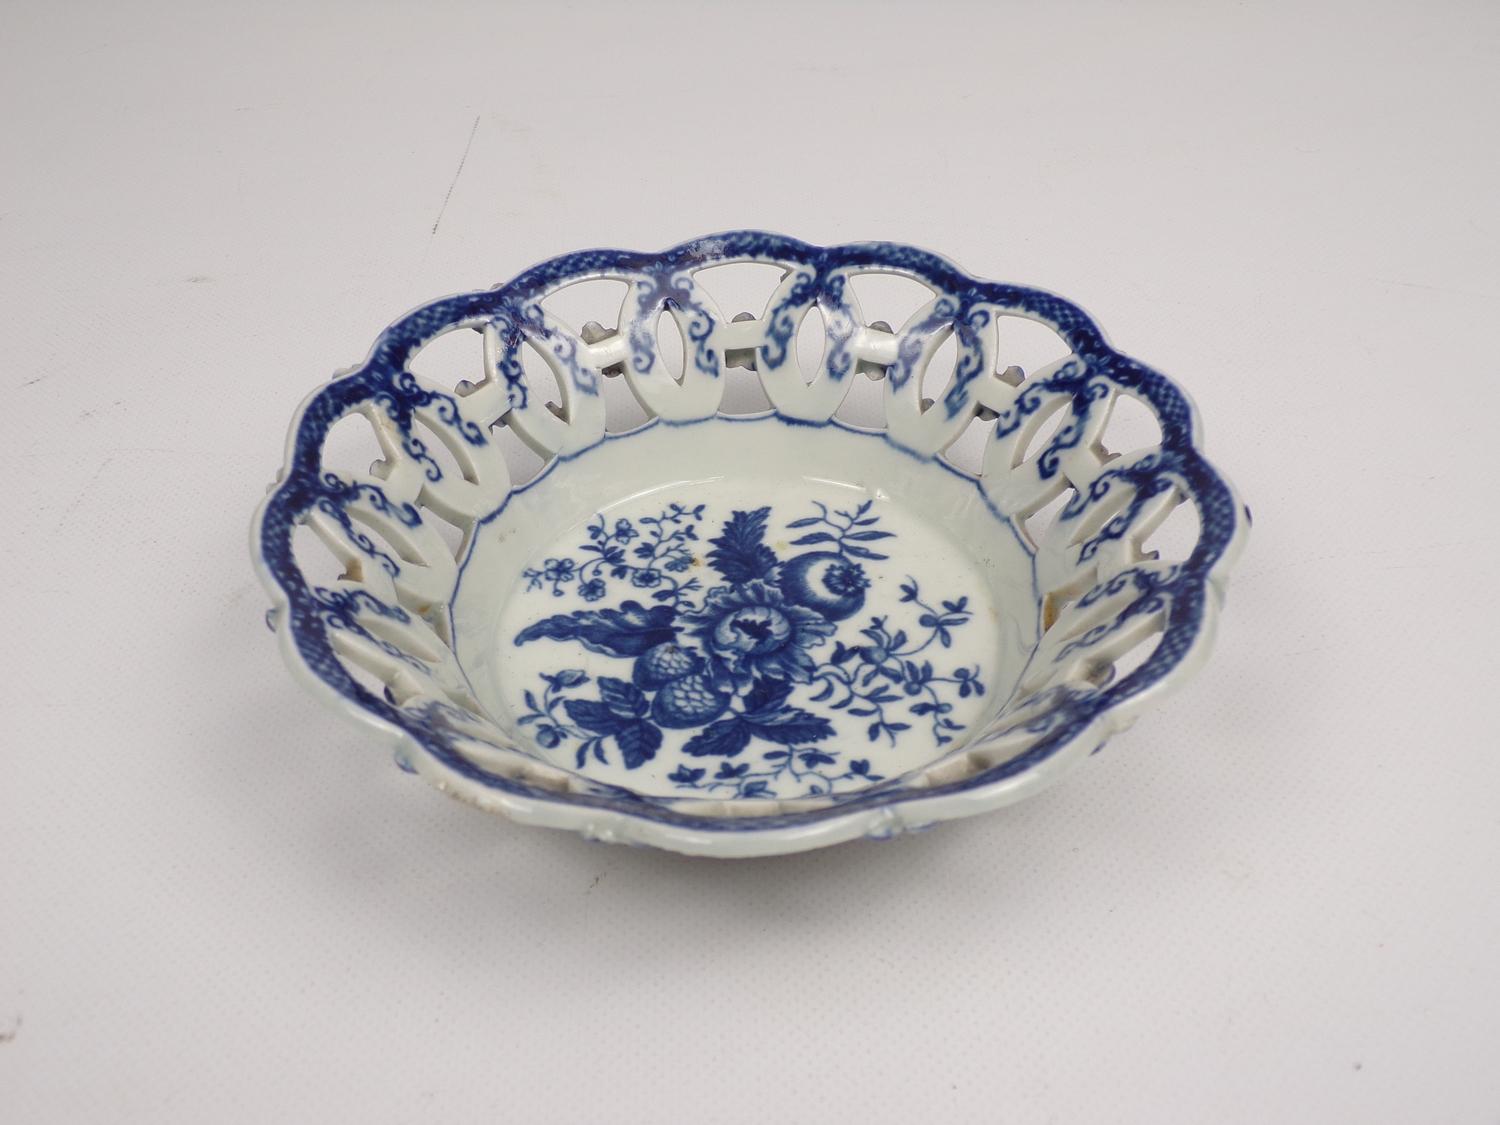 2x First Period Worcester Basket Dishes - One Handle Missing - Image 7 of 9